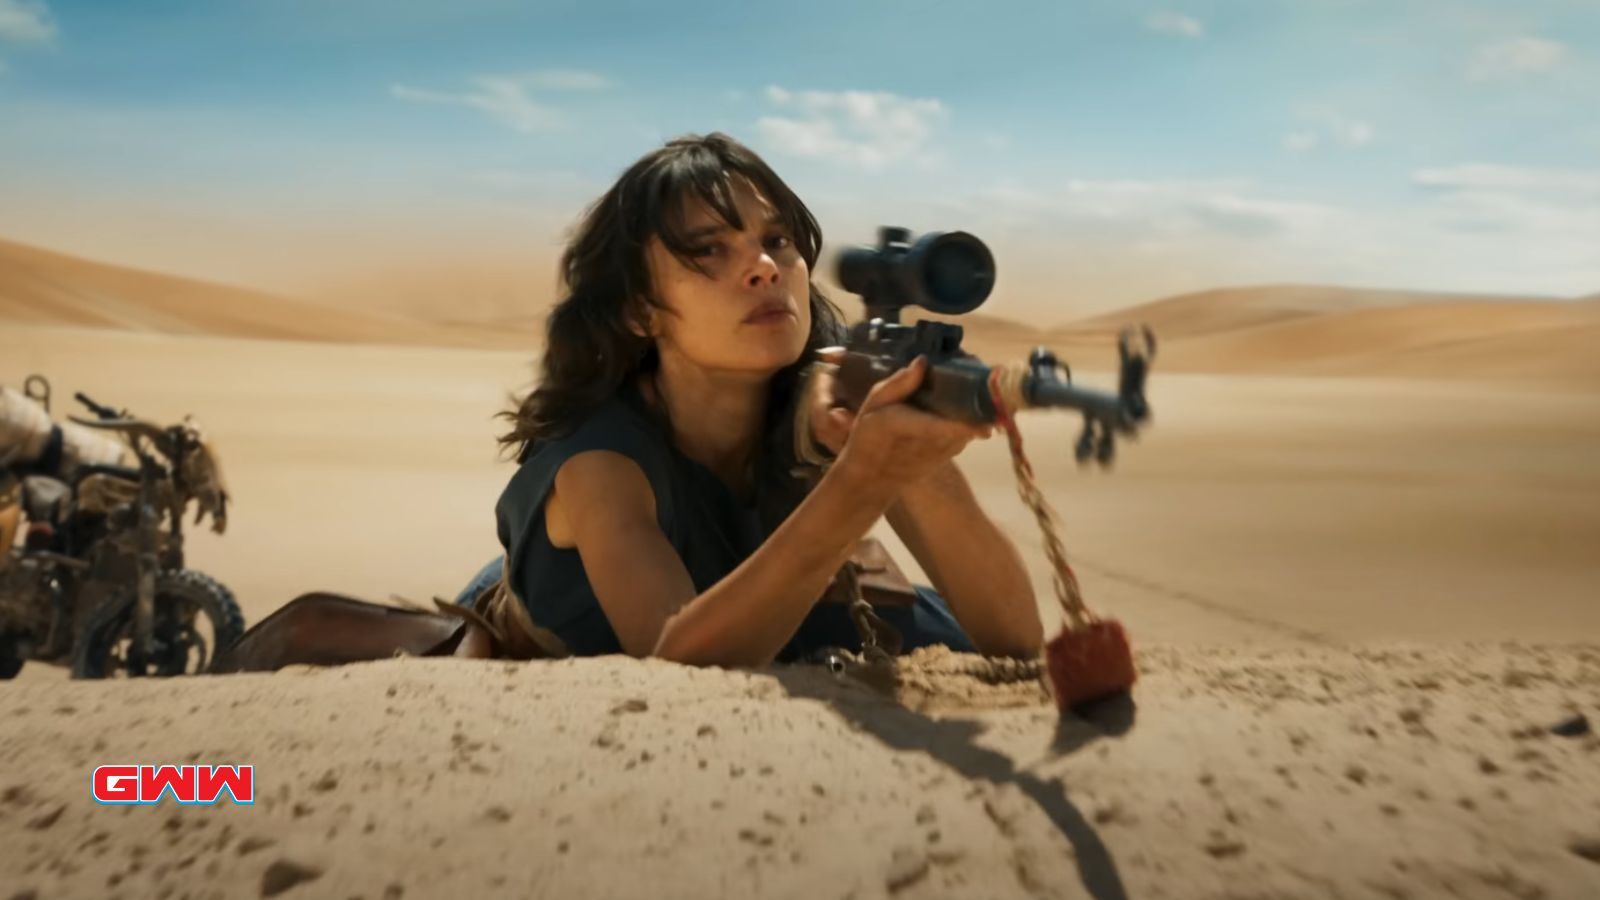 Woman aiming a rifle in a desert landscape.